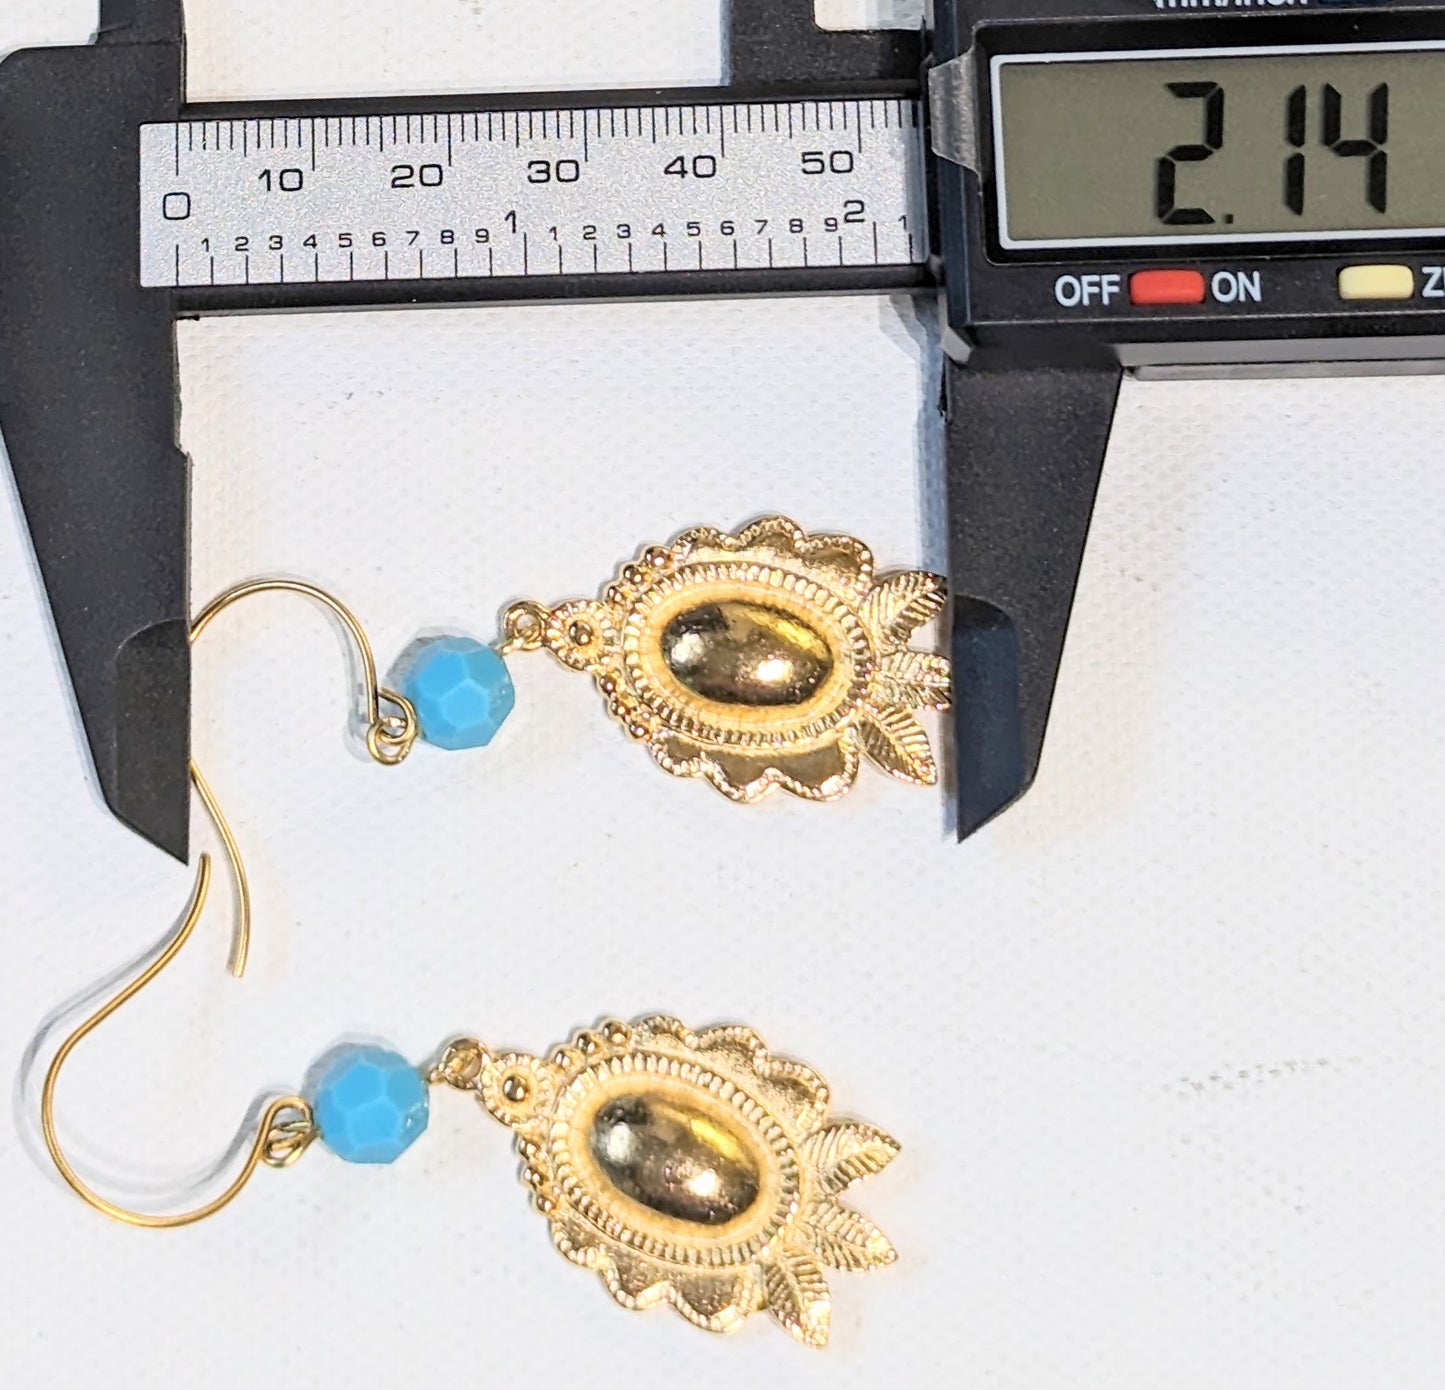 Gold Plated Earrings Swarovski Turquoise 2.1 inch Long USA Made by Sugar Gay Isber unisex-adult